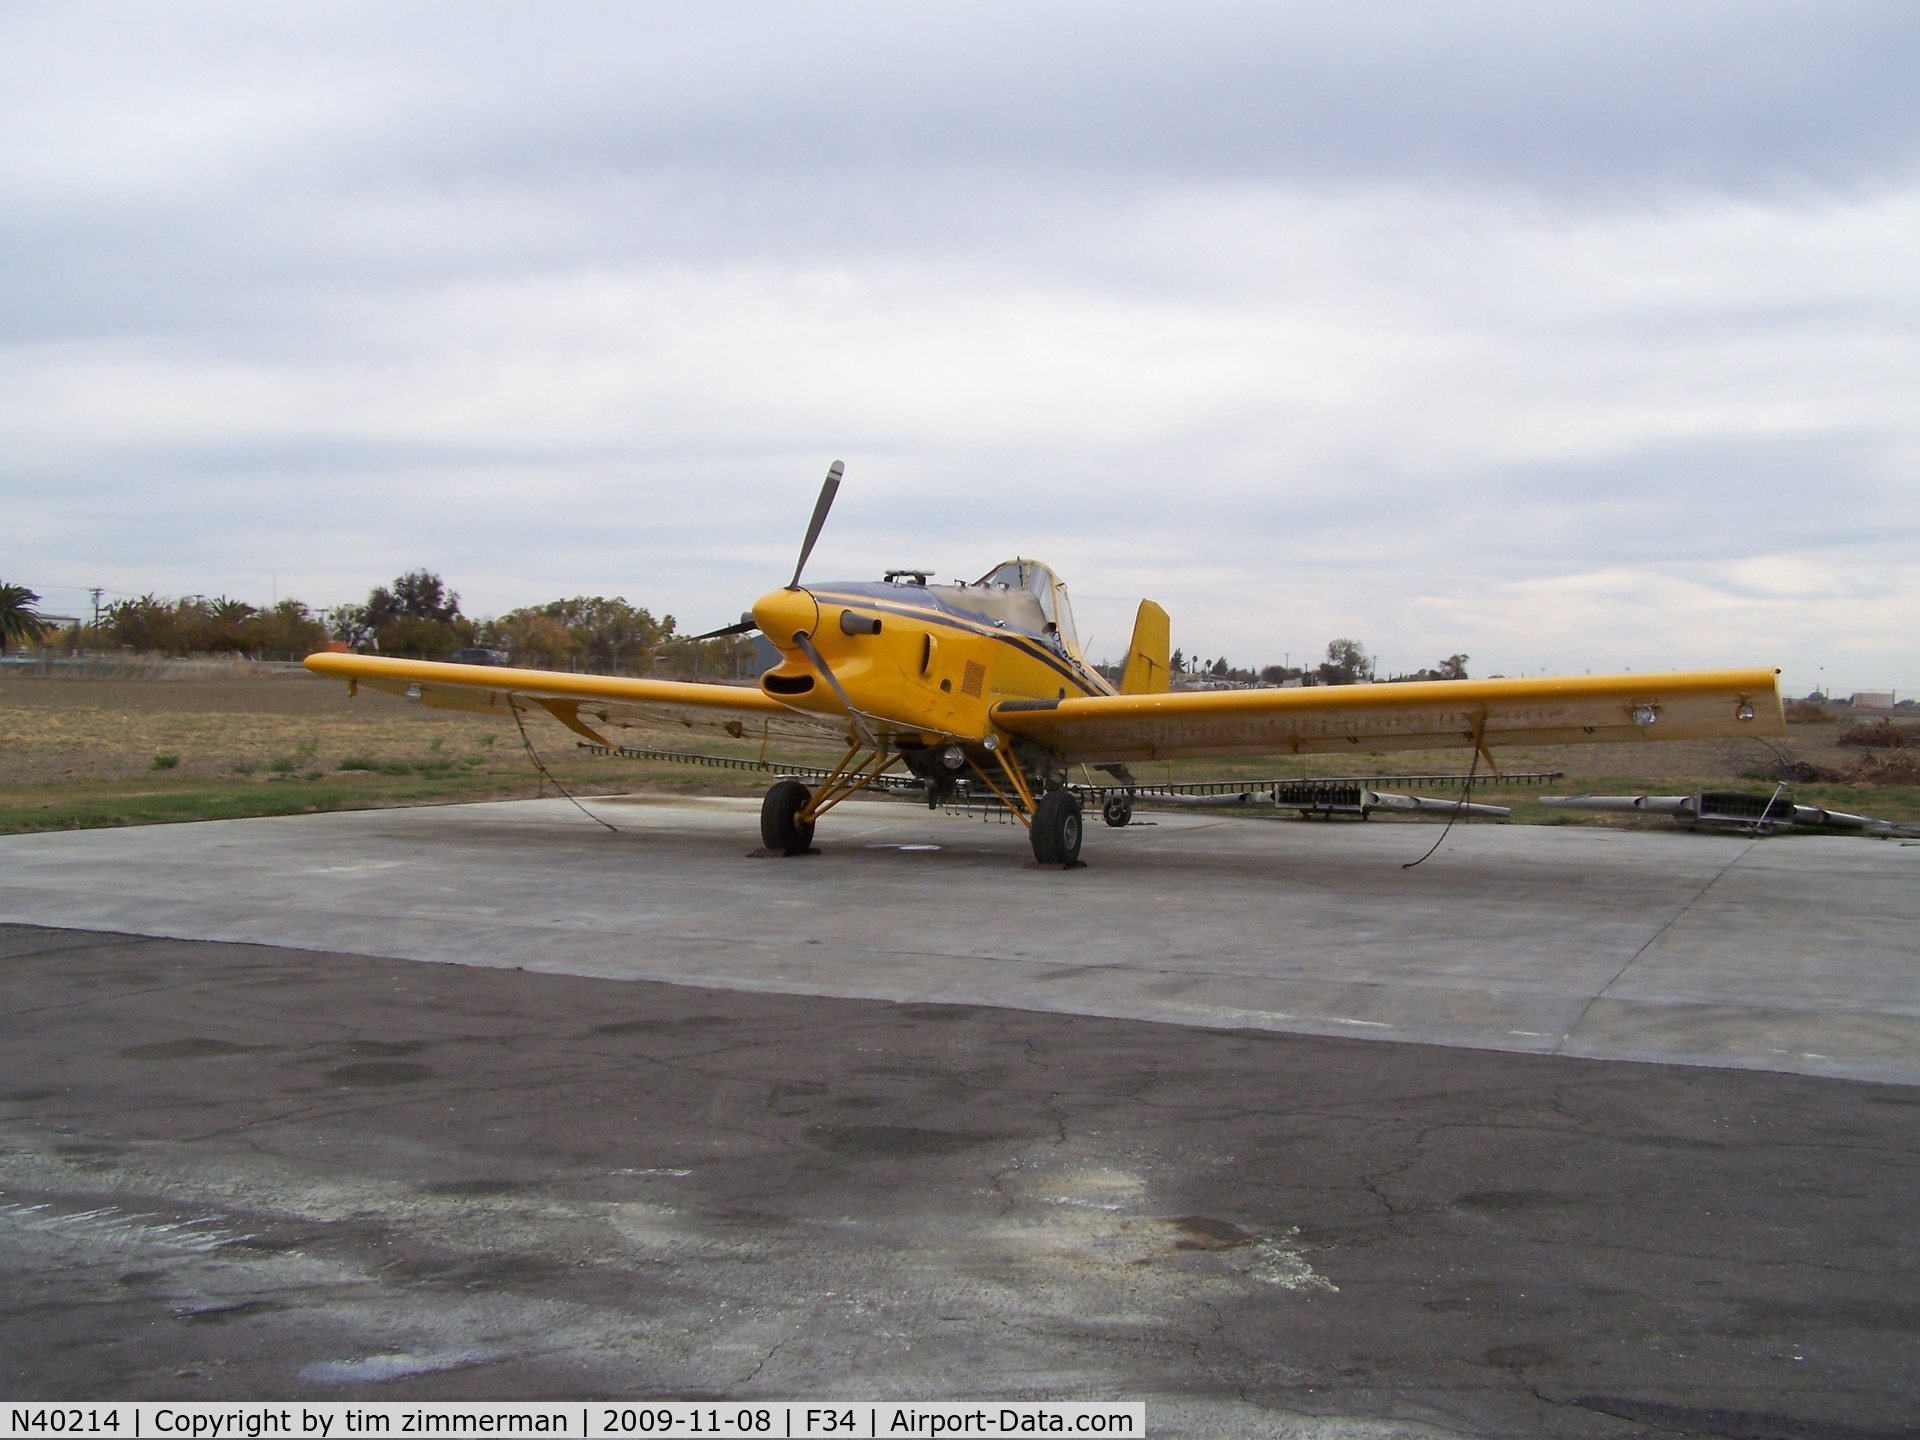 N40214, 1980 Ayres S2R-T34 Thrush C/N T34-032, West Valley Aviation N40214 rigged as sprayer